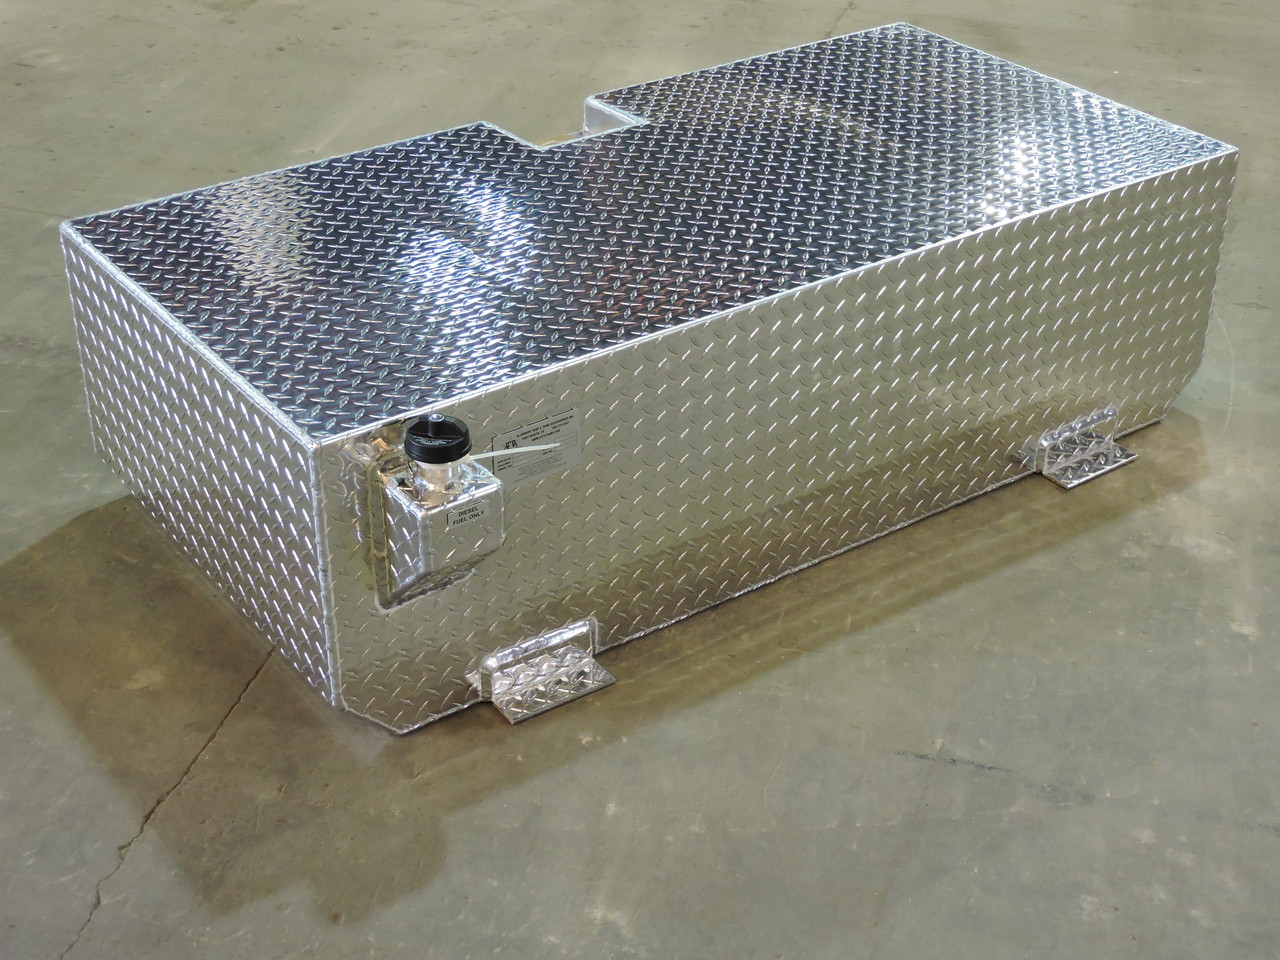 Auxiliary Fuel Tank, 66 Gal., Pickup Truck Bed, Trailer Flatbed